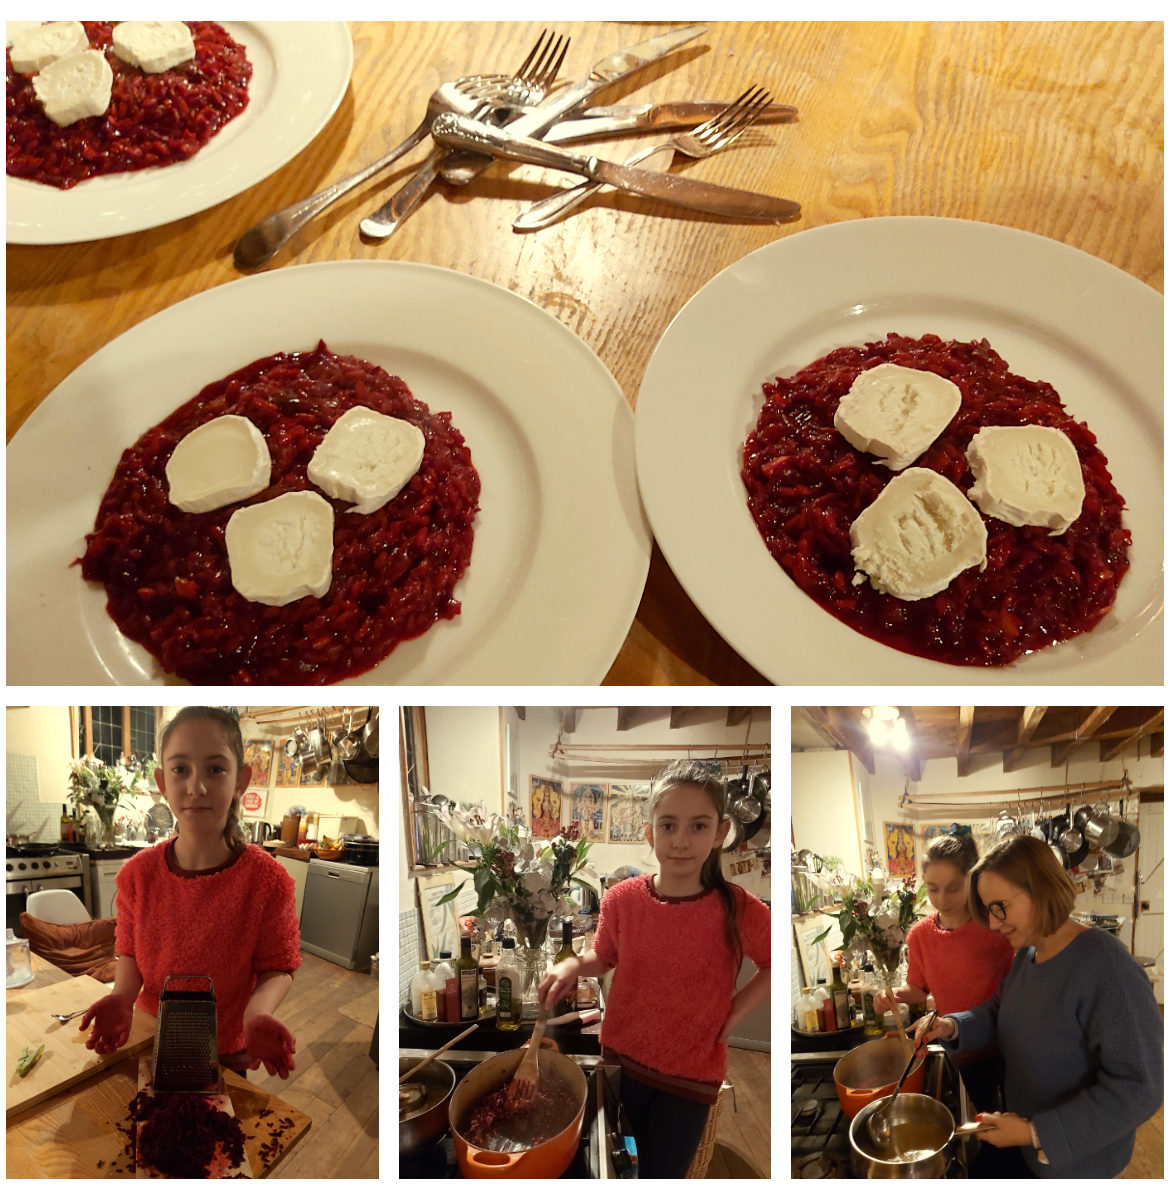 Beetroot risotto with goat’s cheese